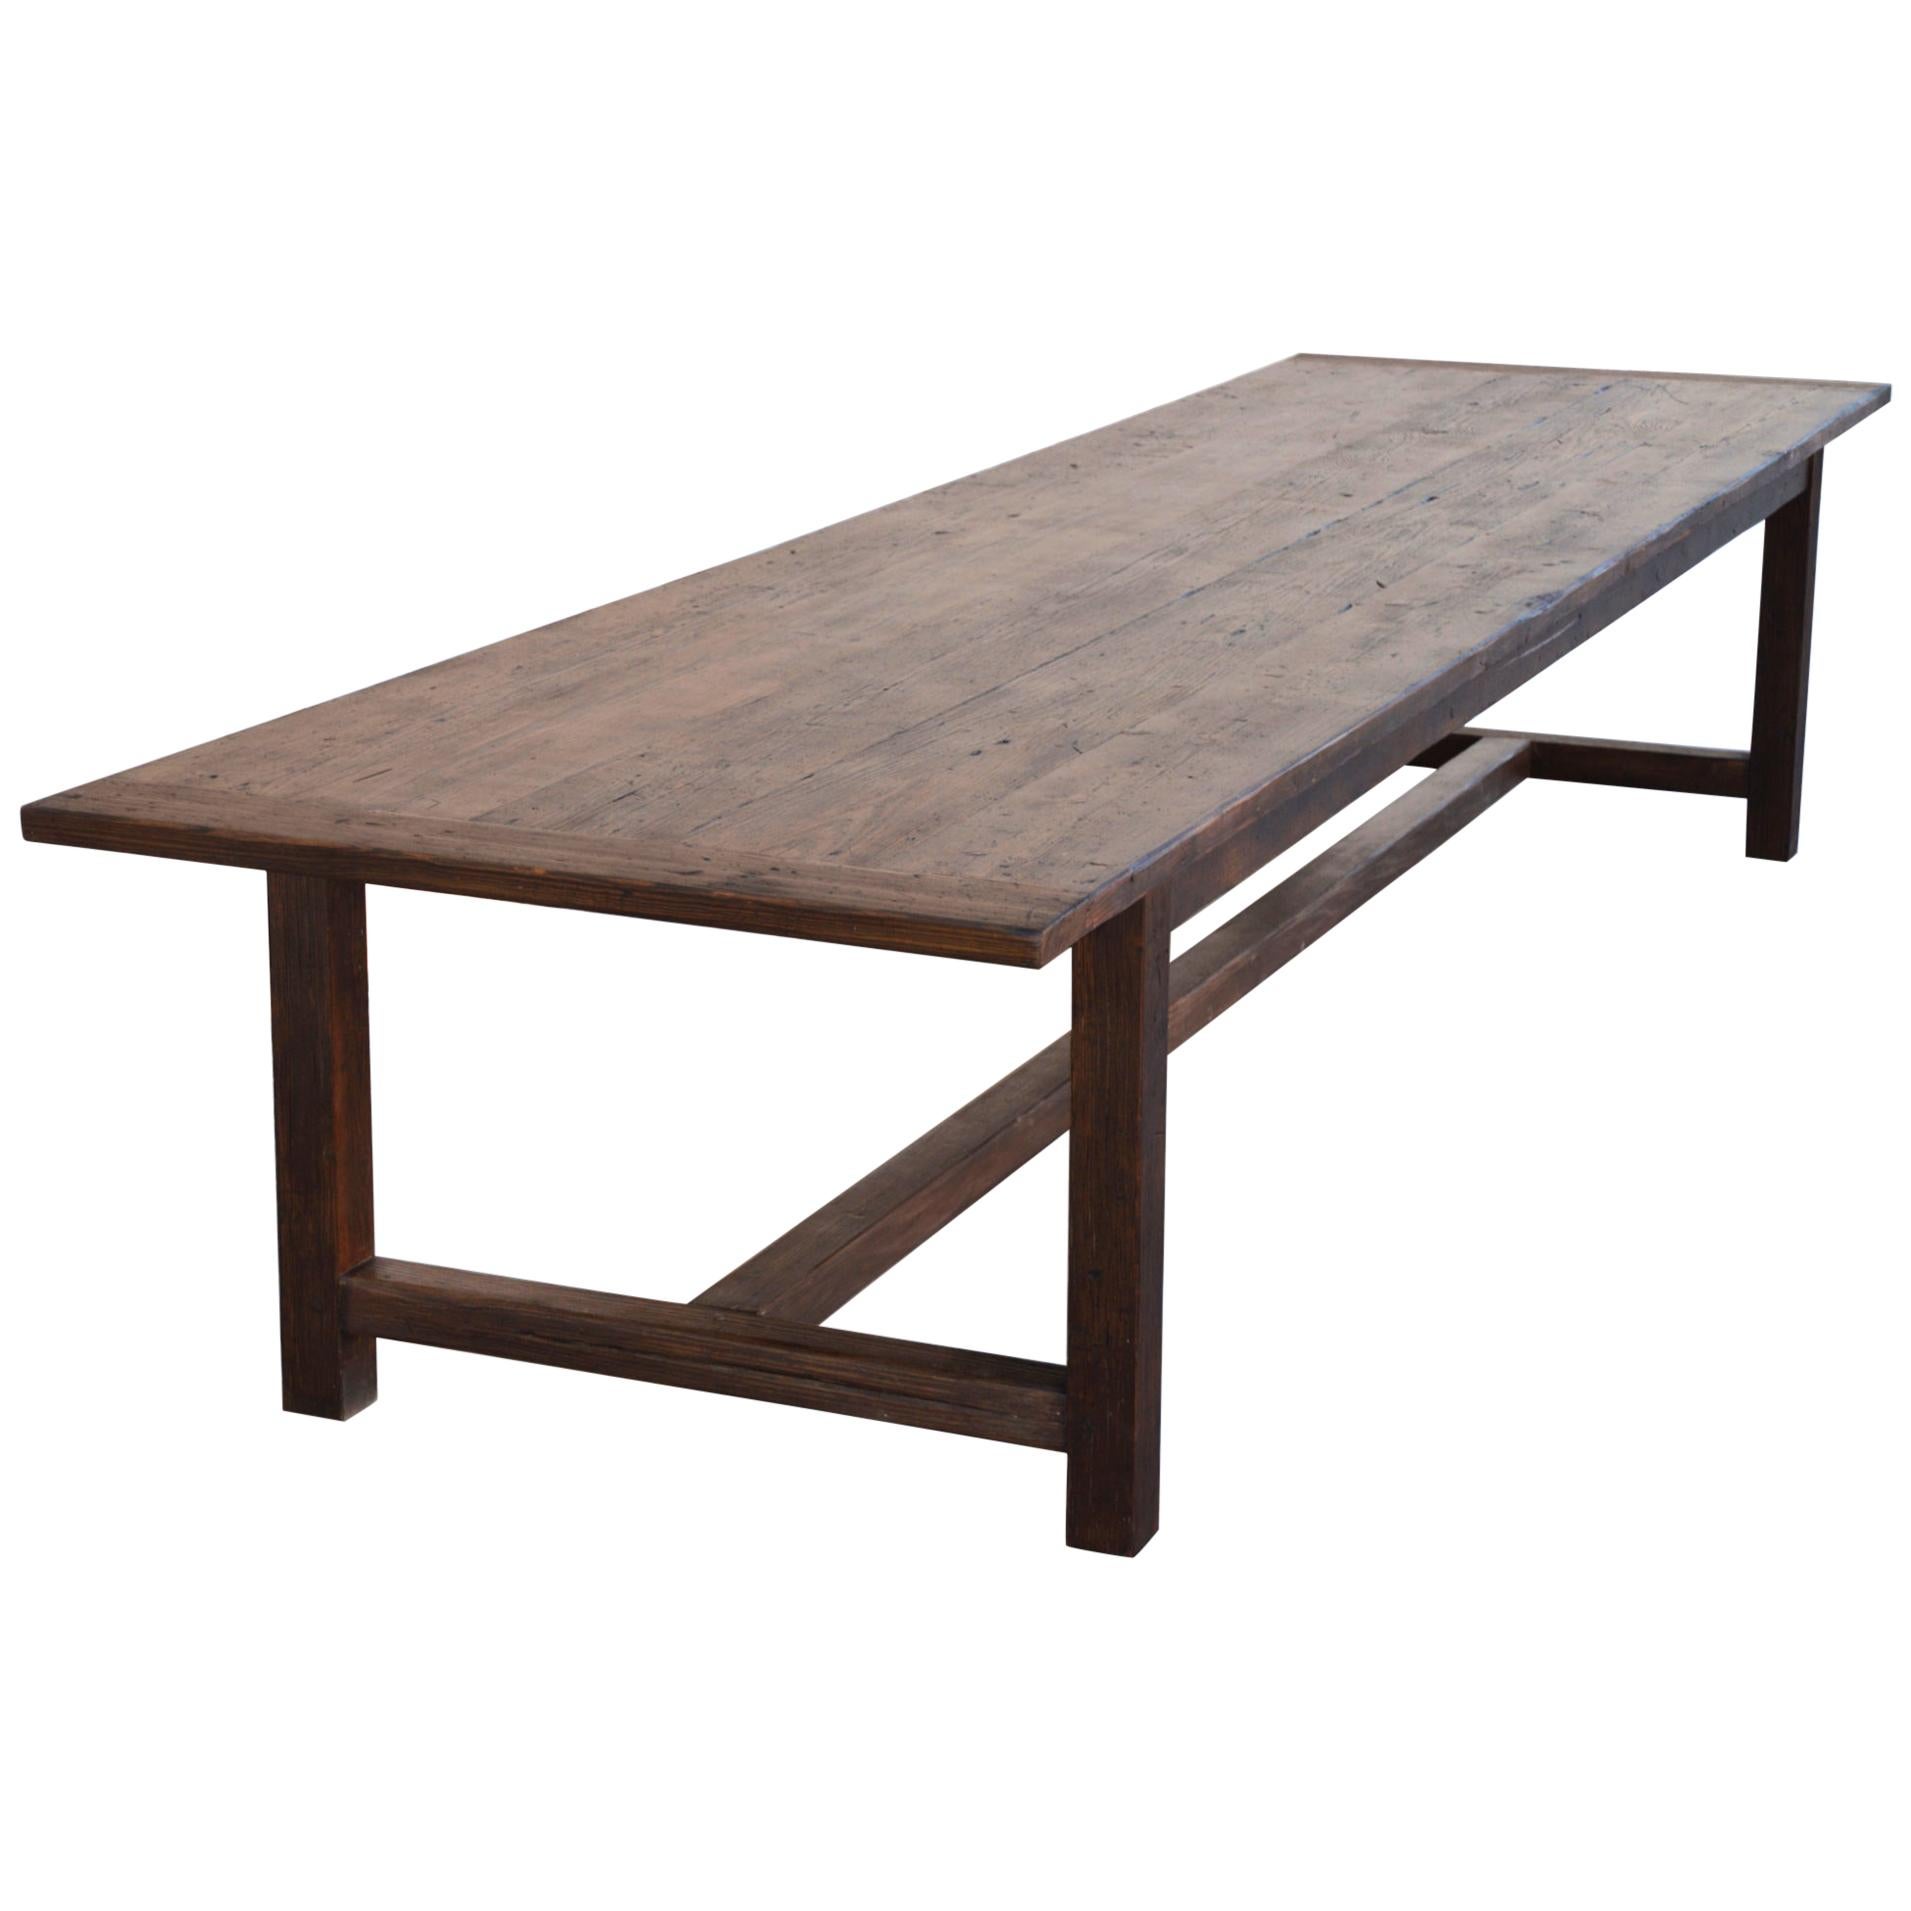 Large Rustic Farm Table Made from Reclaimed Pine